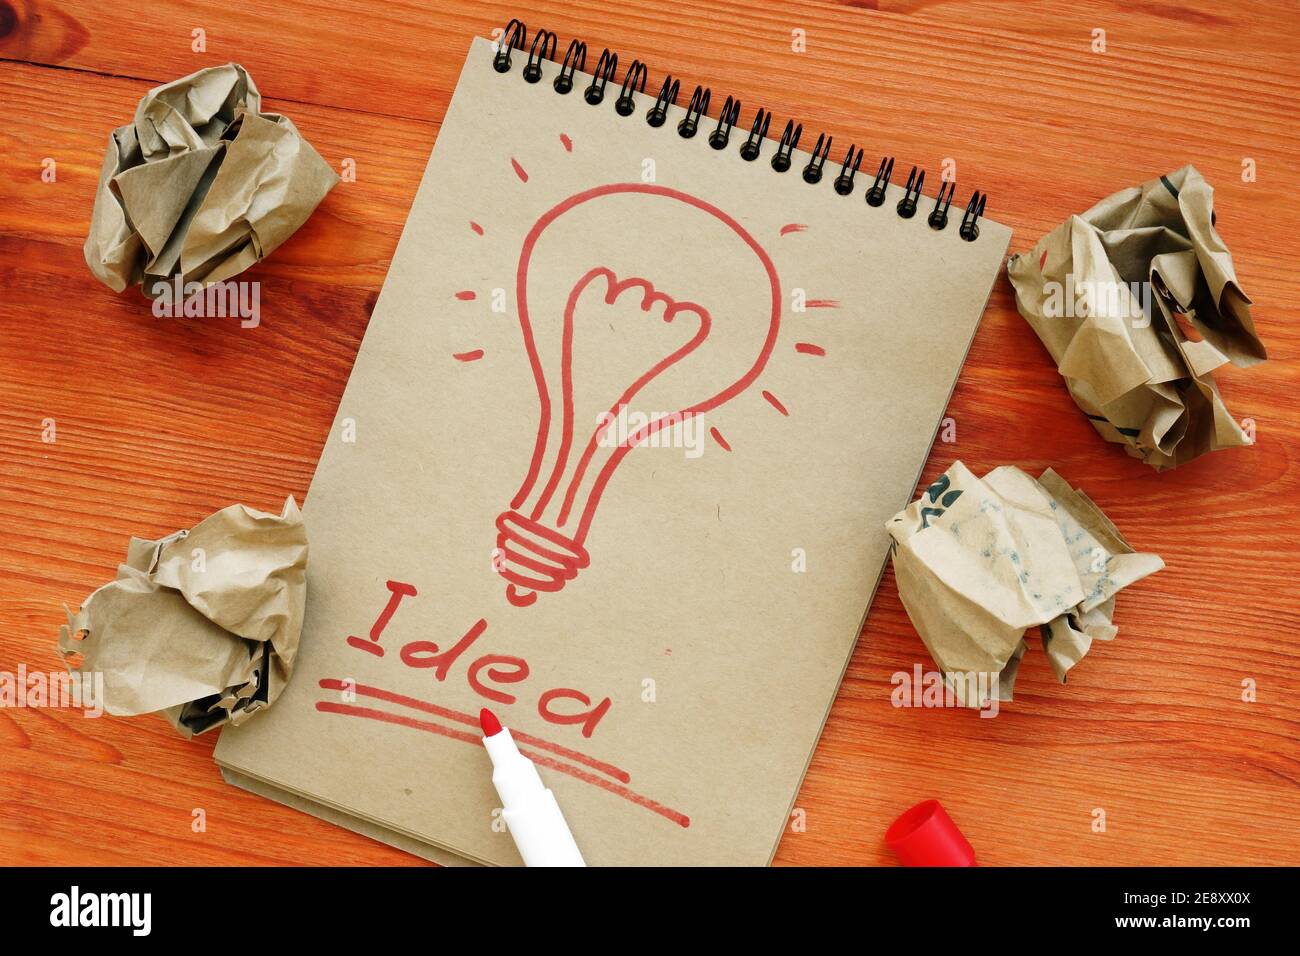 Idea concept. Light bulb as symbol of creativity. Success and sheets of paper after unsuccessful attempts. Stock Photo